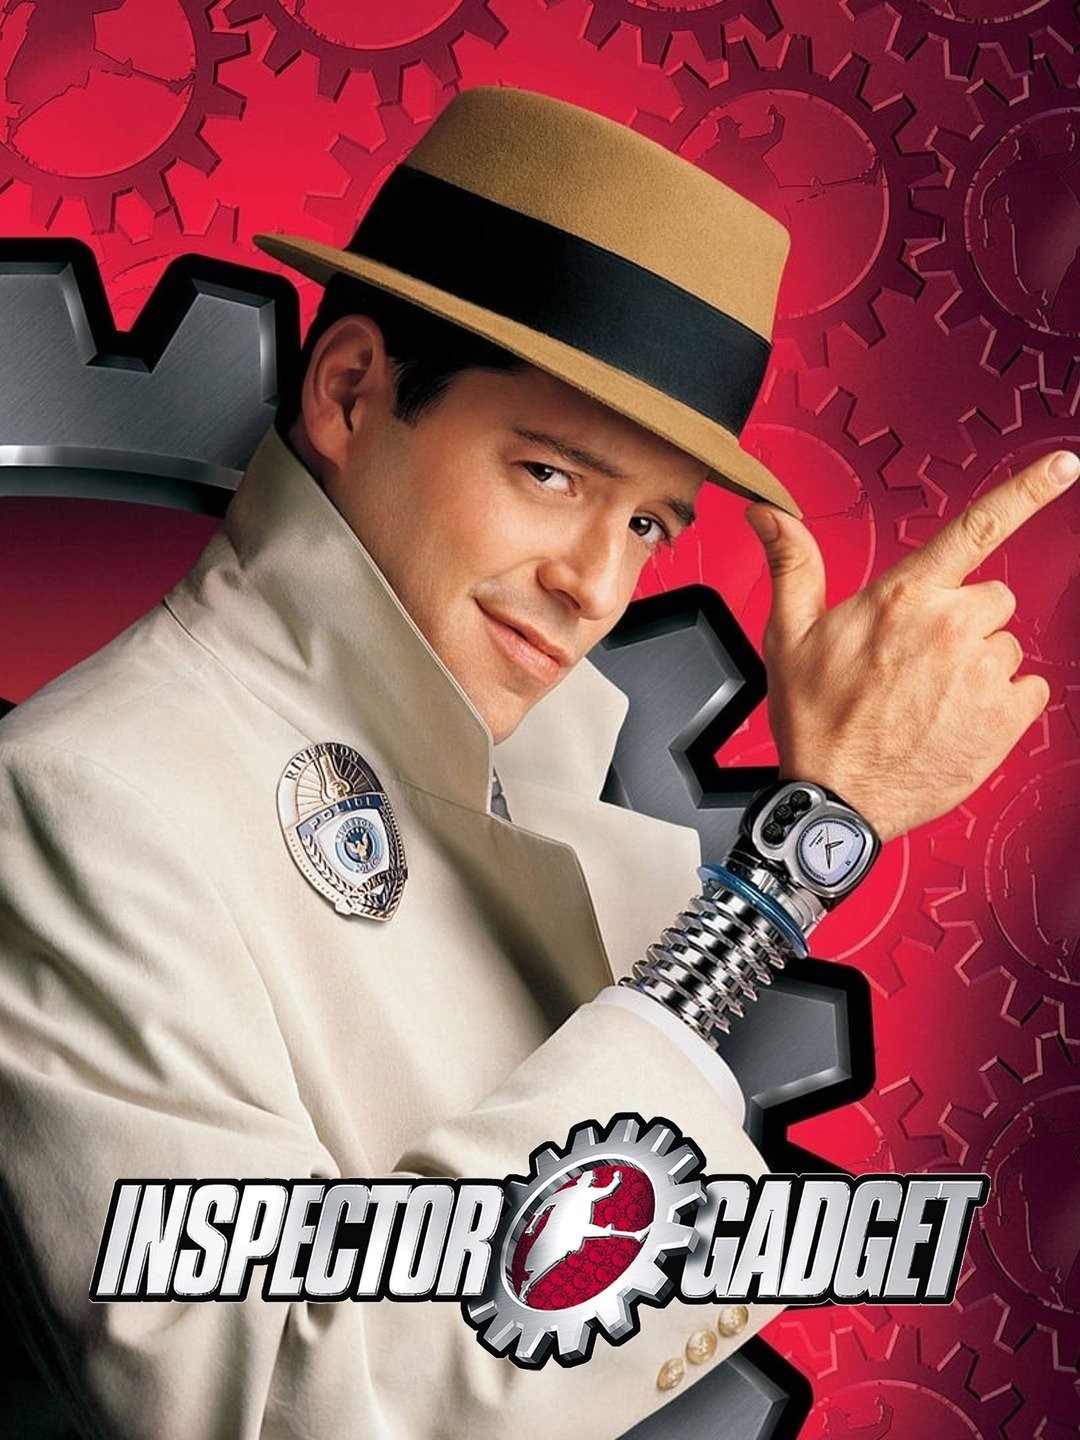 amanda lacy recommends inspect her gadget movie pic